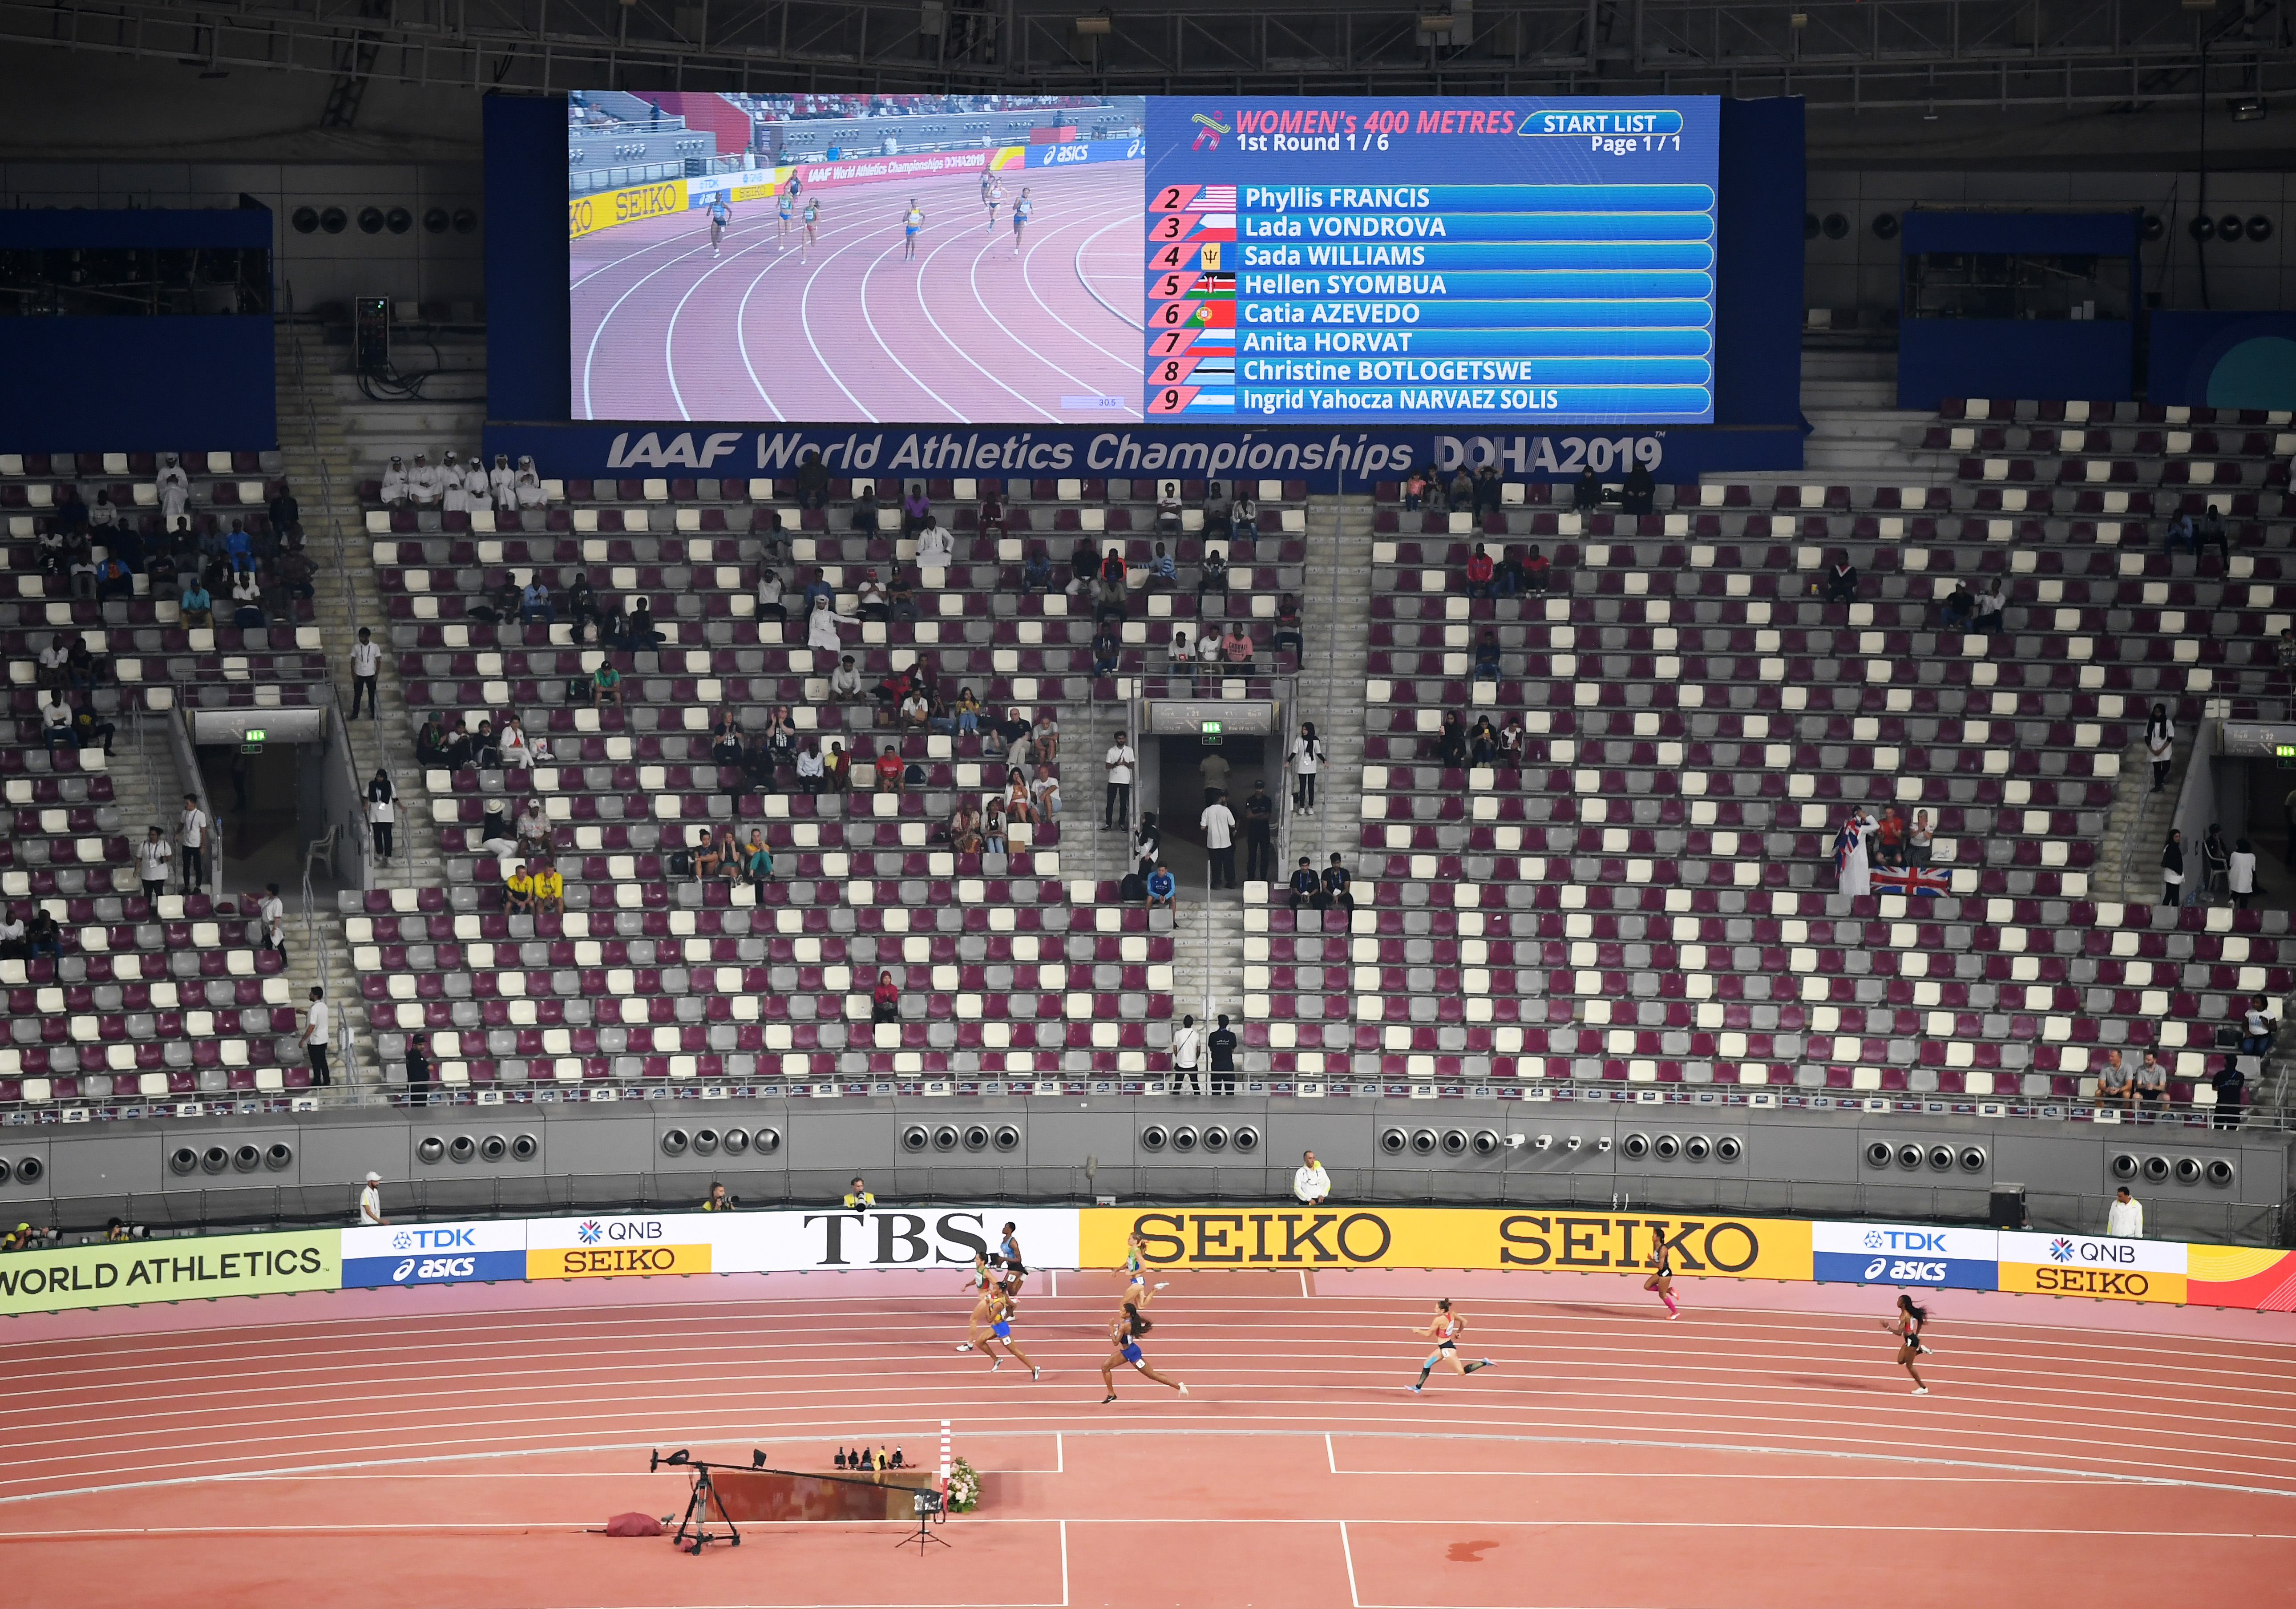 Empty seats at the recent World Athletics Championships in Doha could be a sign of things to come when the World Cup Finals kick off in November, 2022